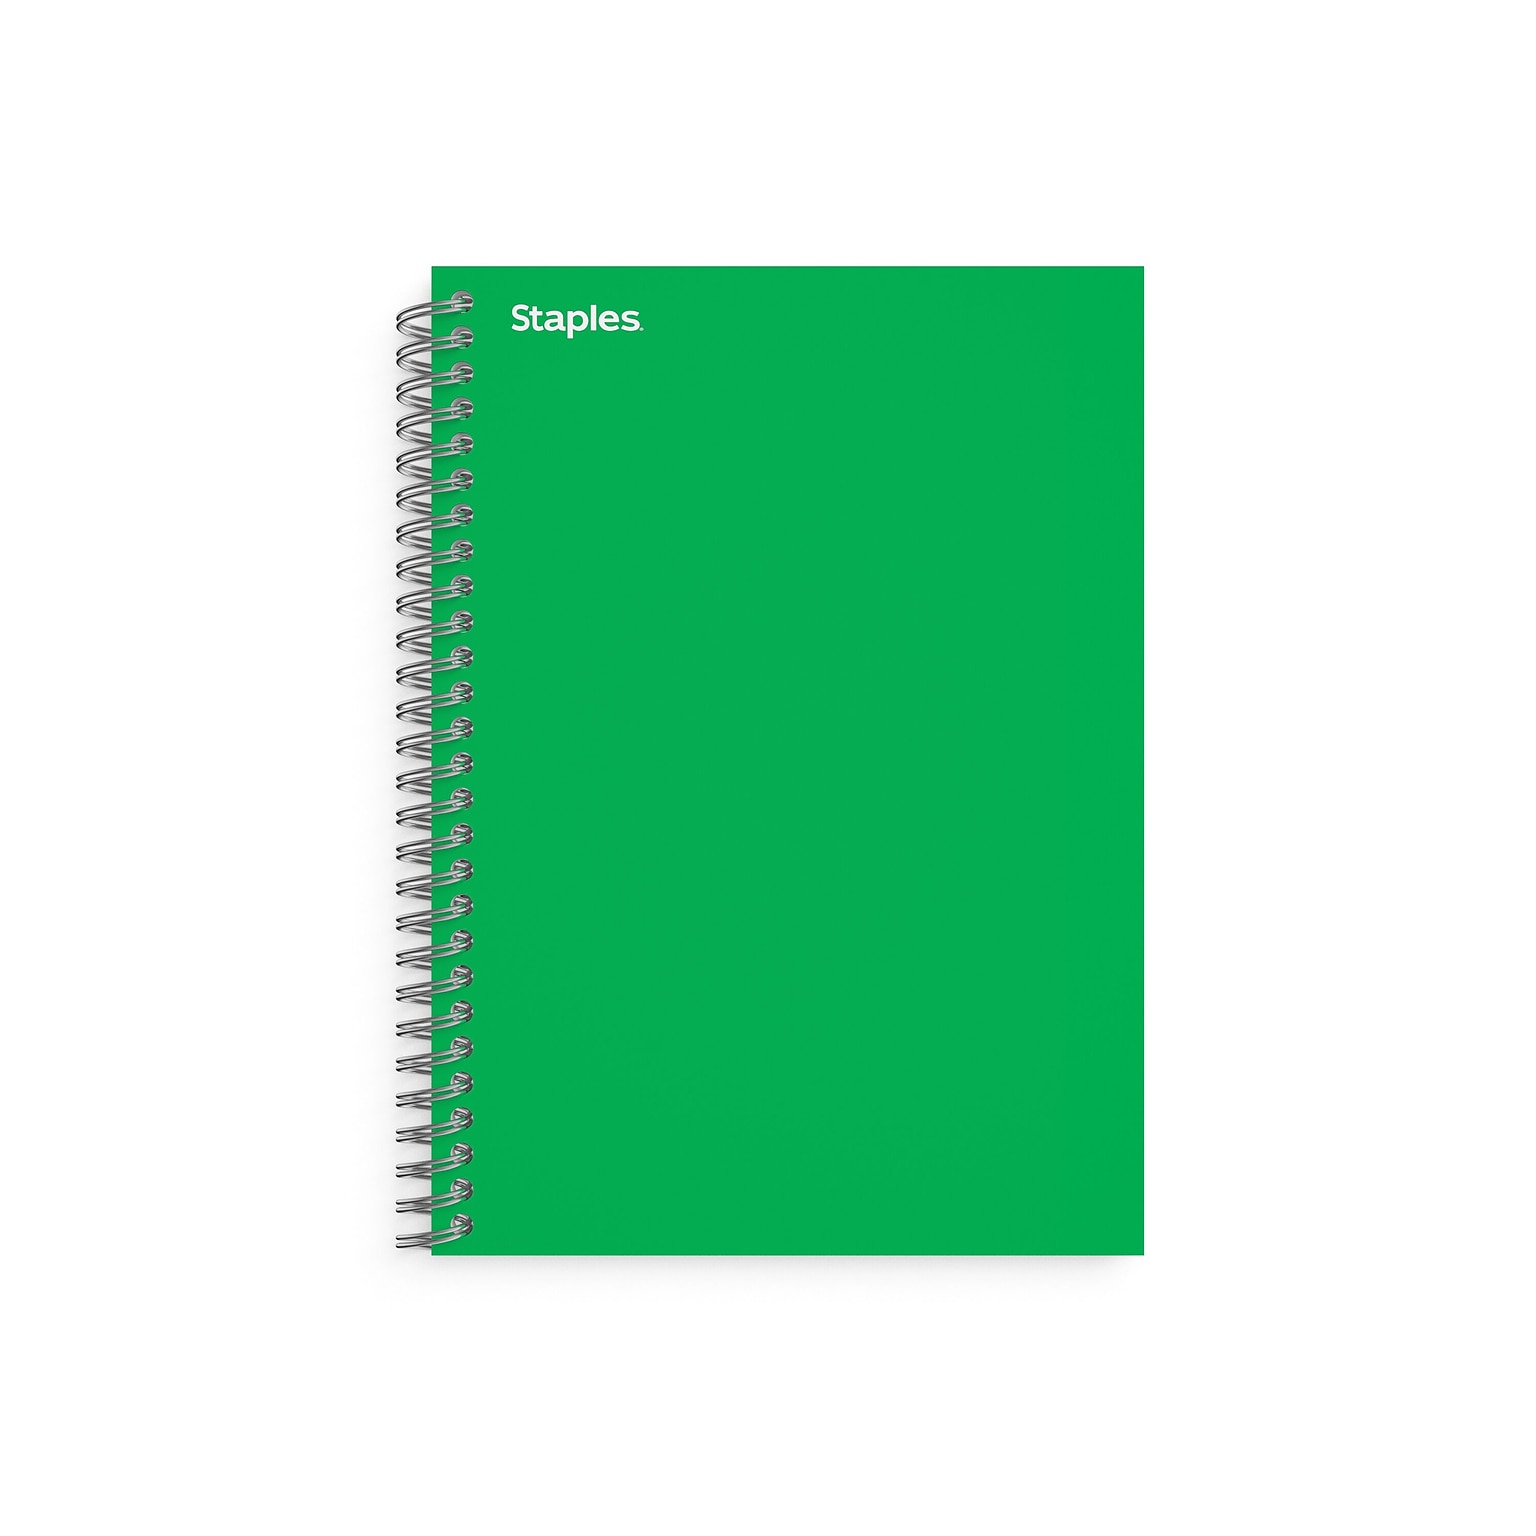 Staples Premium 1-Subject Notebook, 4.38 x 7, College Ruled, 80 Sheets, Reissue Green (TR58350M)